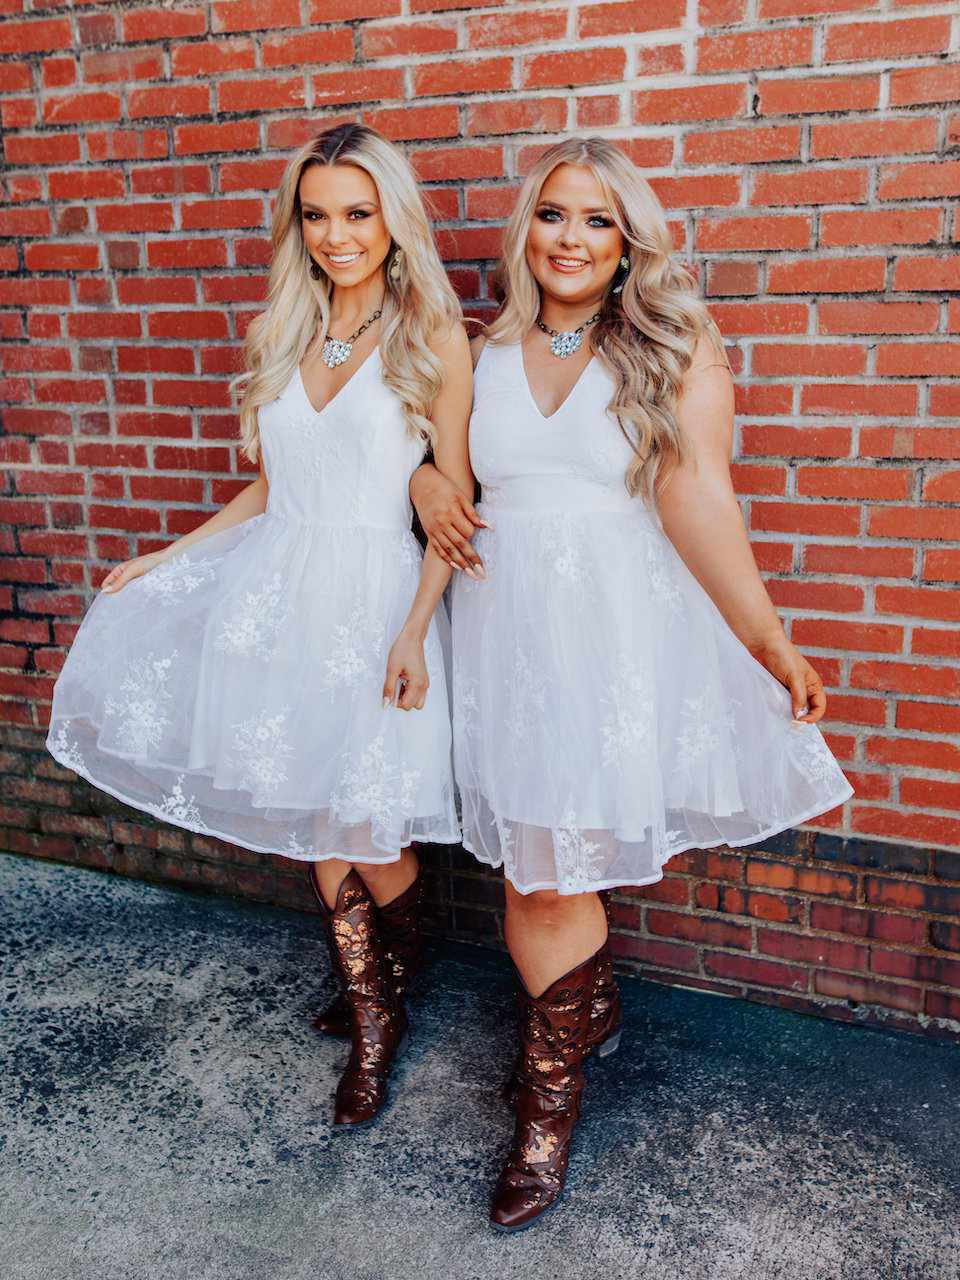 Need You Now Dress - White-Dresses-Southern Fried Chics